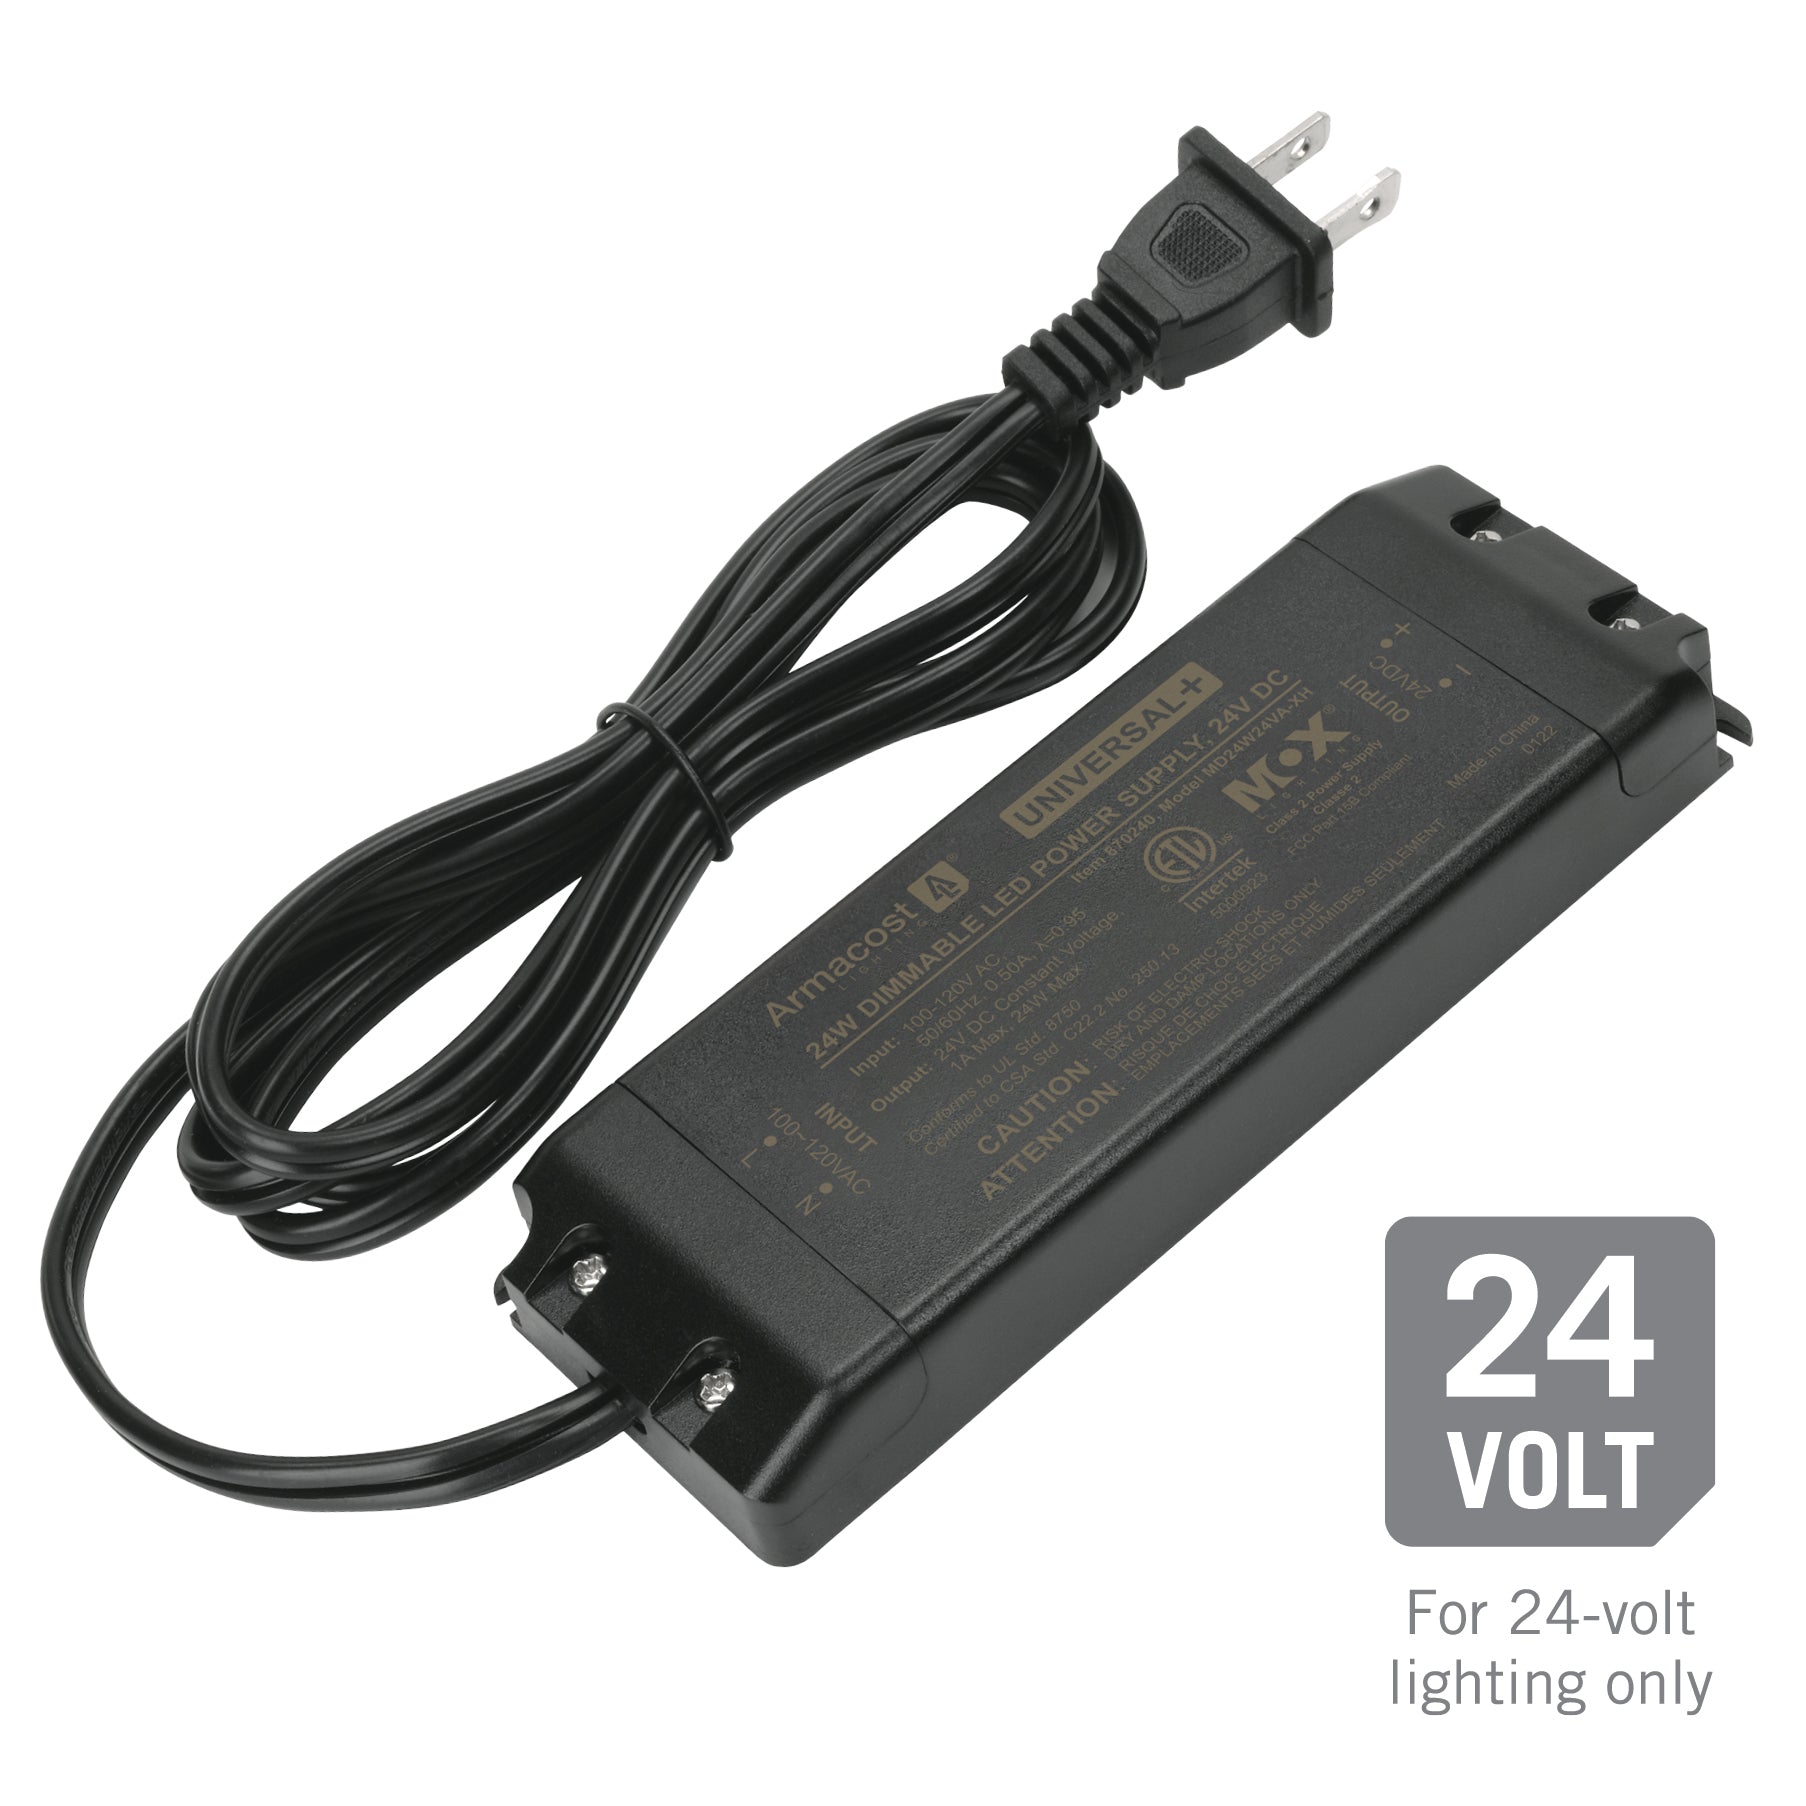 Armacost Lighting Universal+ Dimmable LED Driver 24V DC Chargers 24W